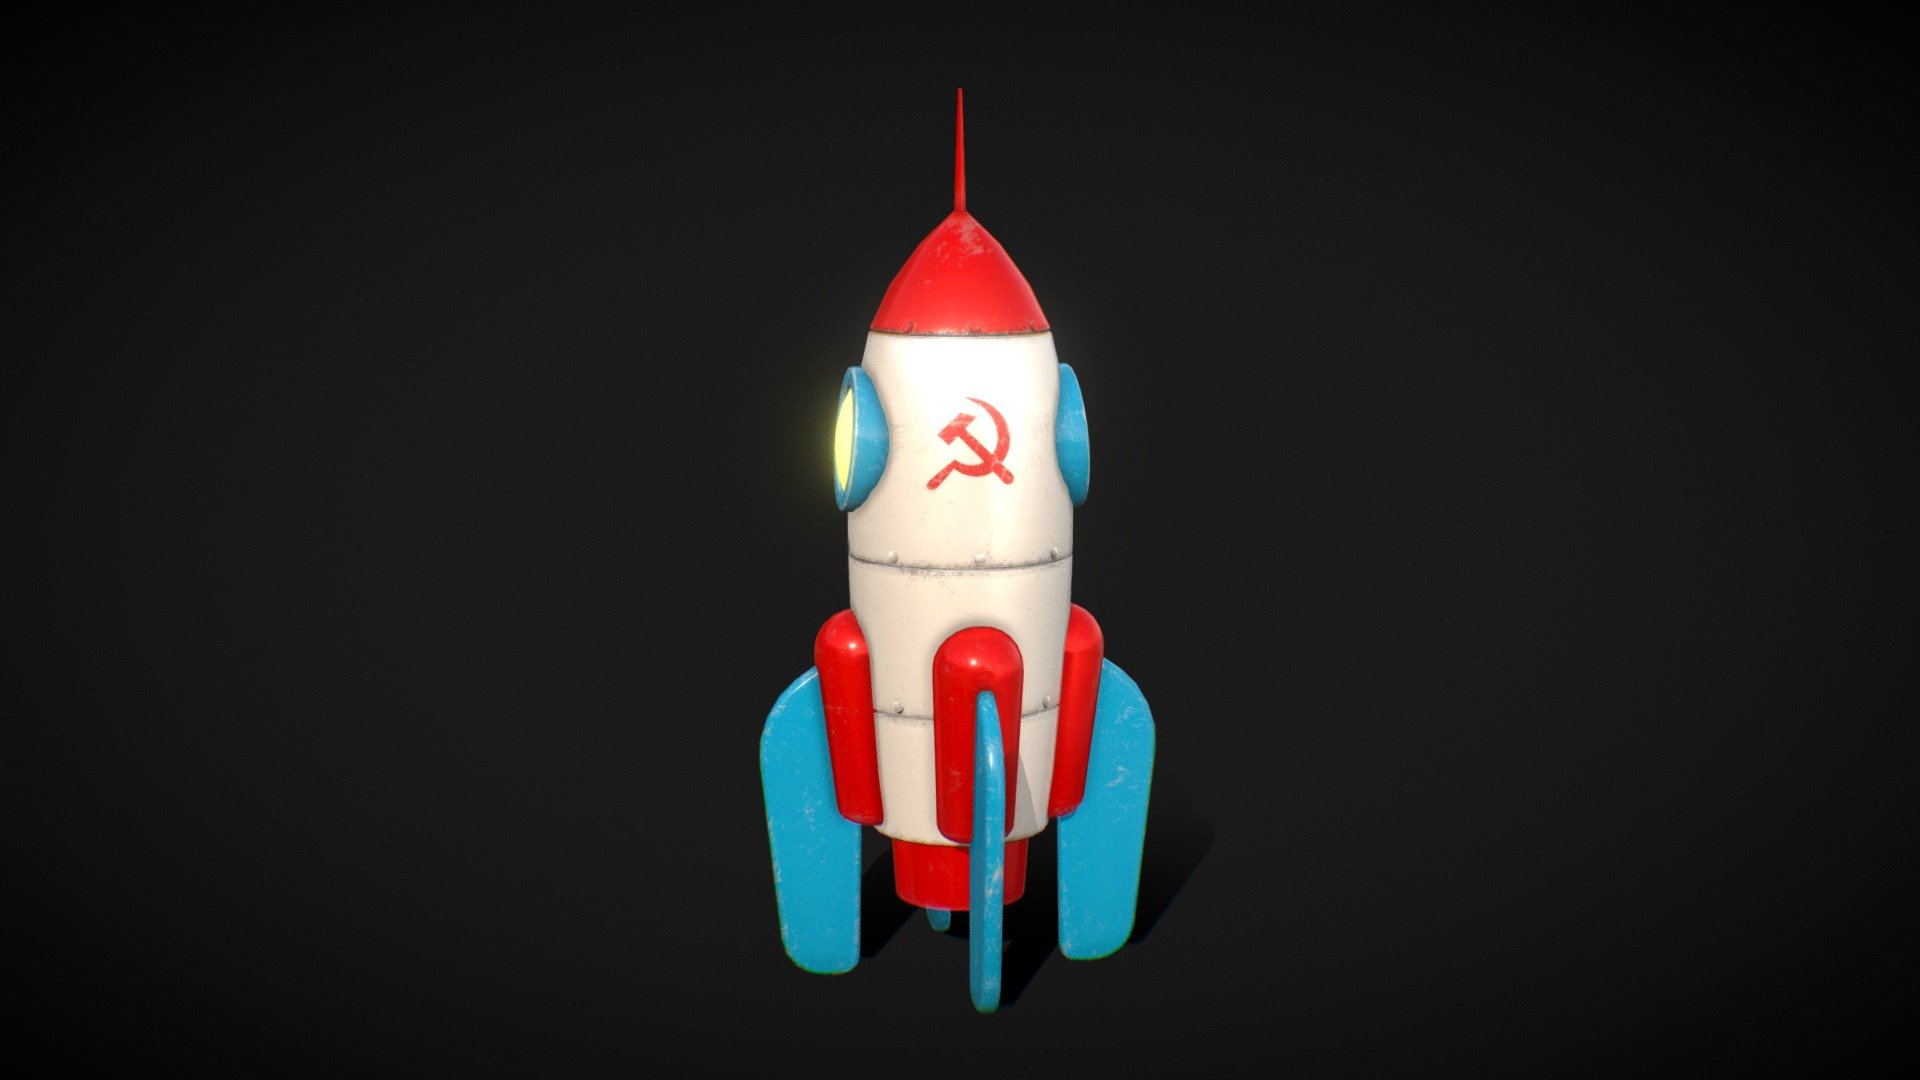 Retro rocket from the USSR. 
Worn out soviet space rocket made of rough metal.
PBG textures included 3d model